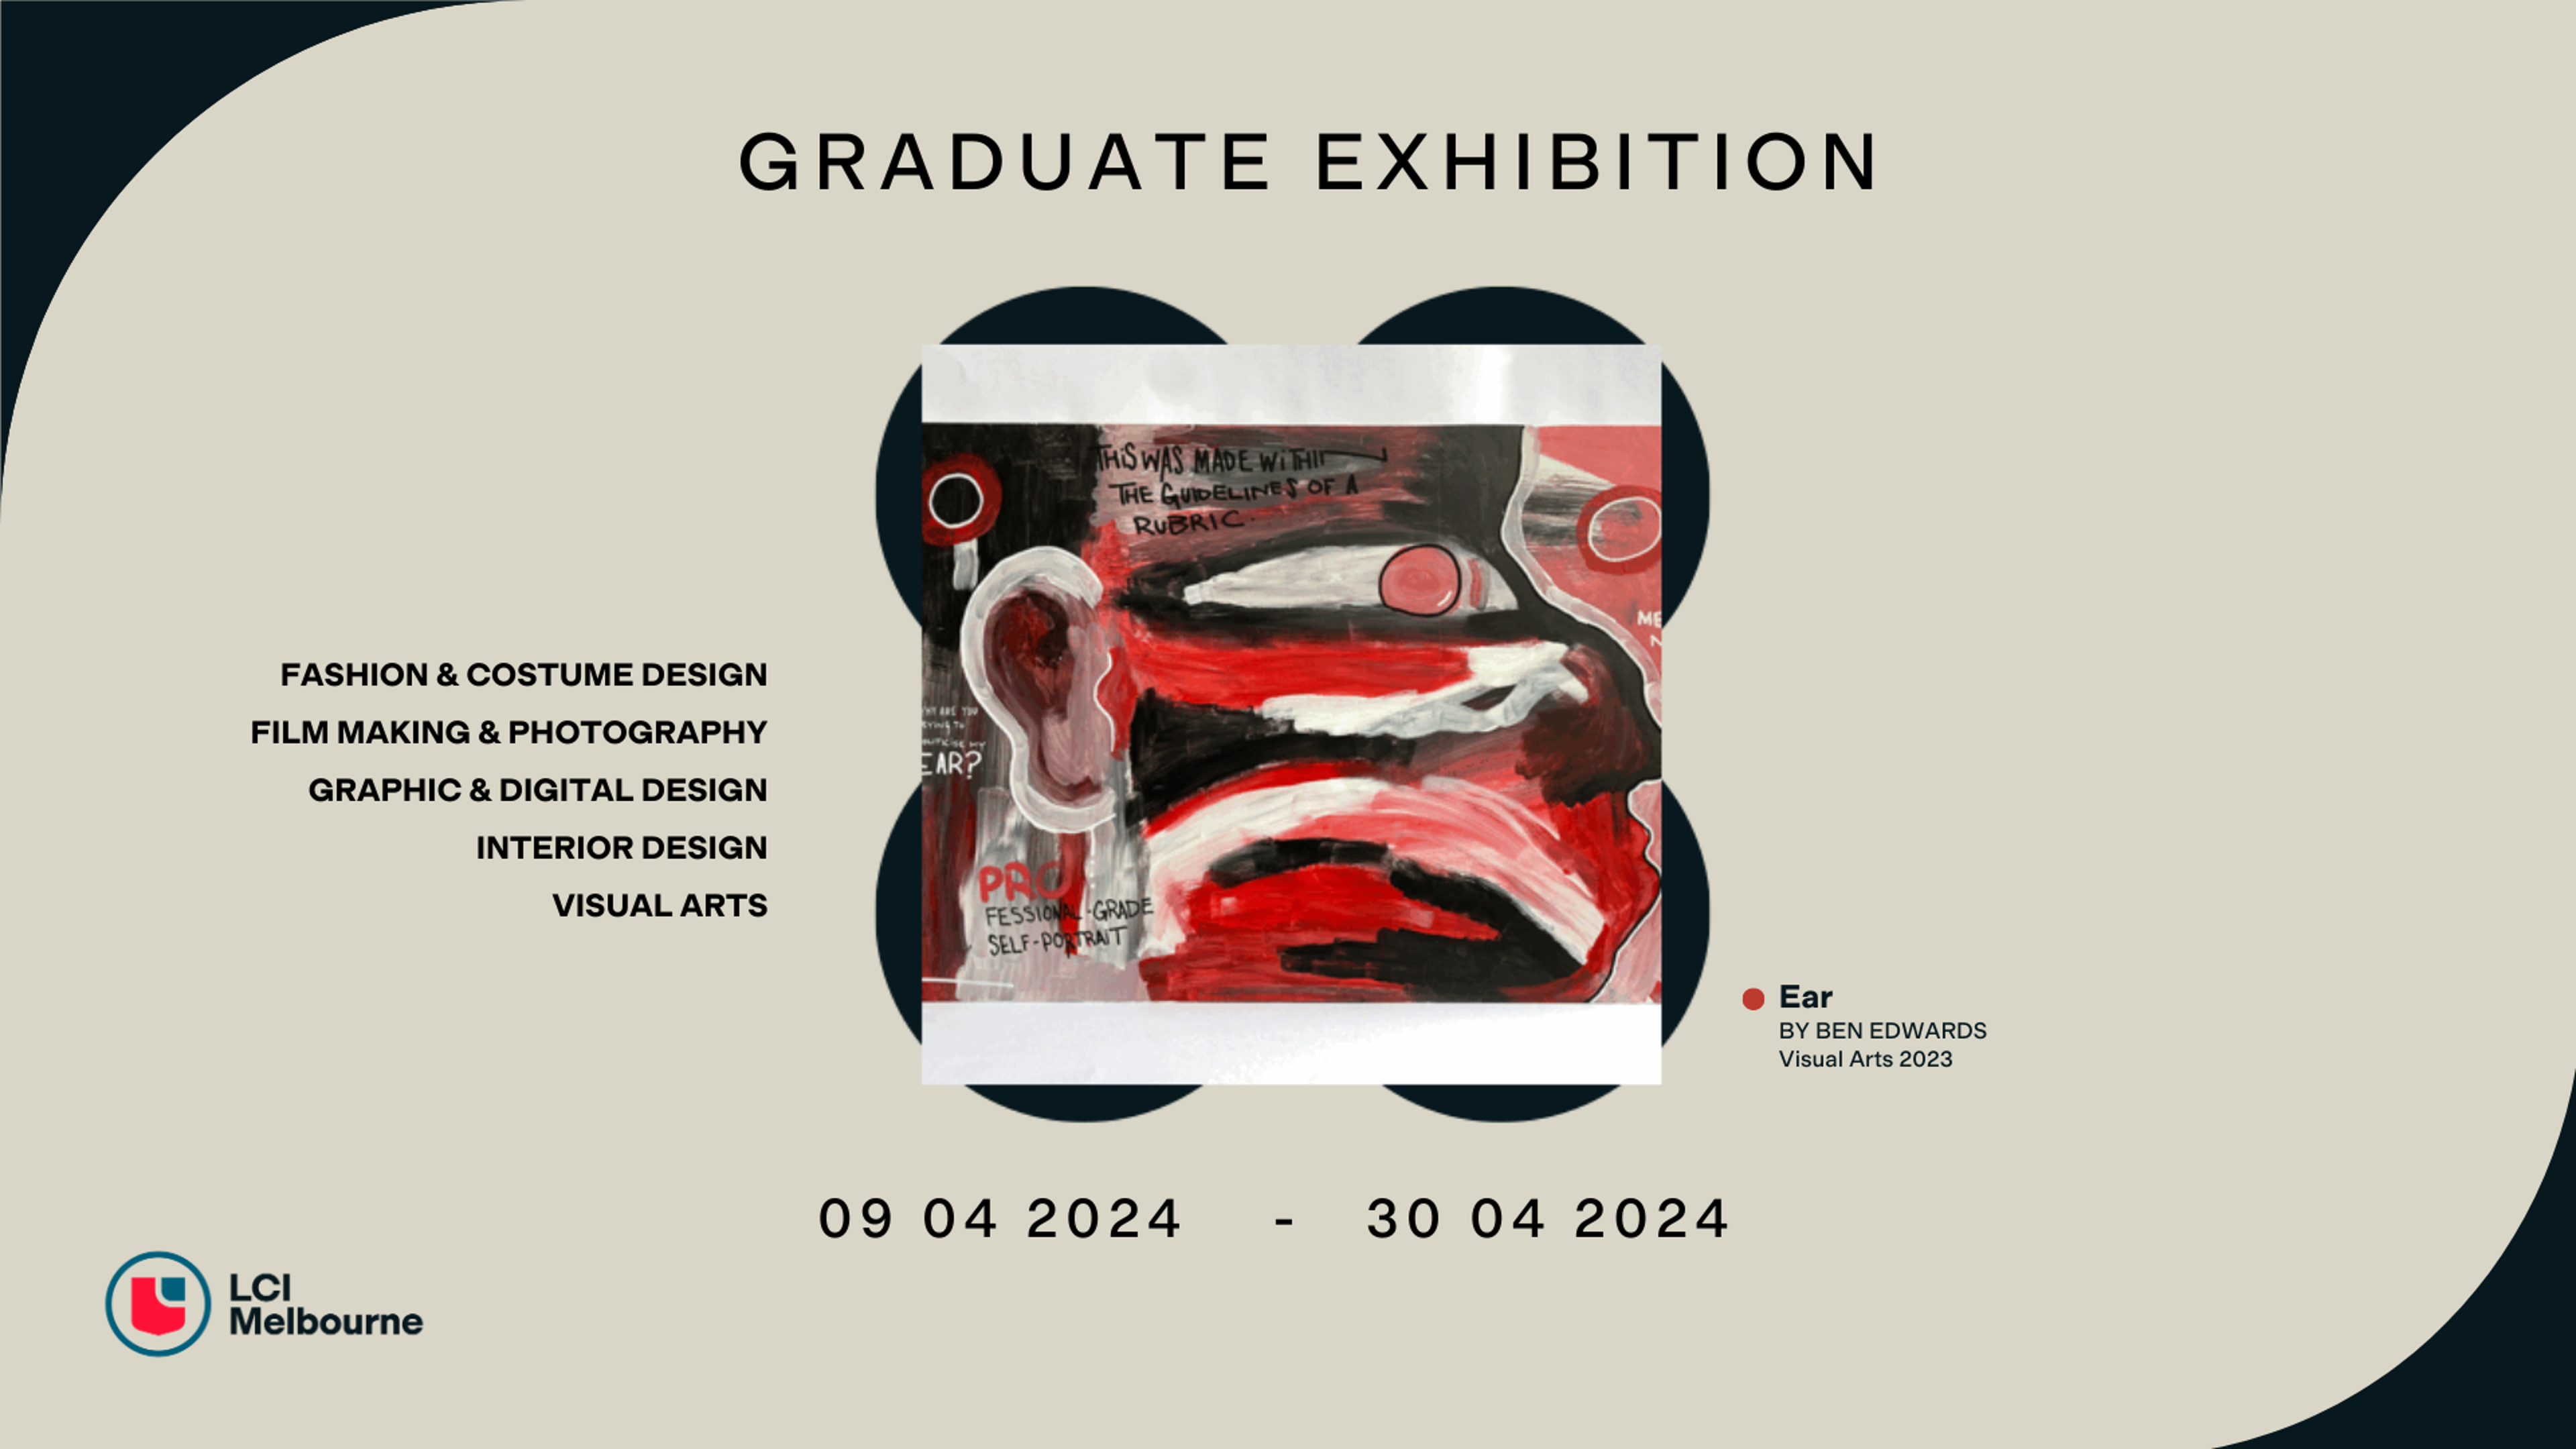 Poster for a graduate exhibition at LCI Melbourne from 09-04 to 30-04-2024, featuring categories like fashion, film, and visual arts, highlighted by a vivid abstract painting.